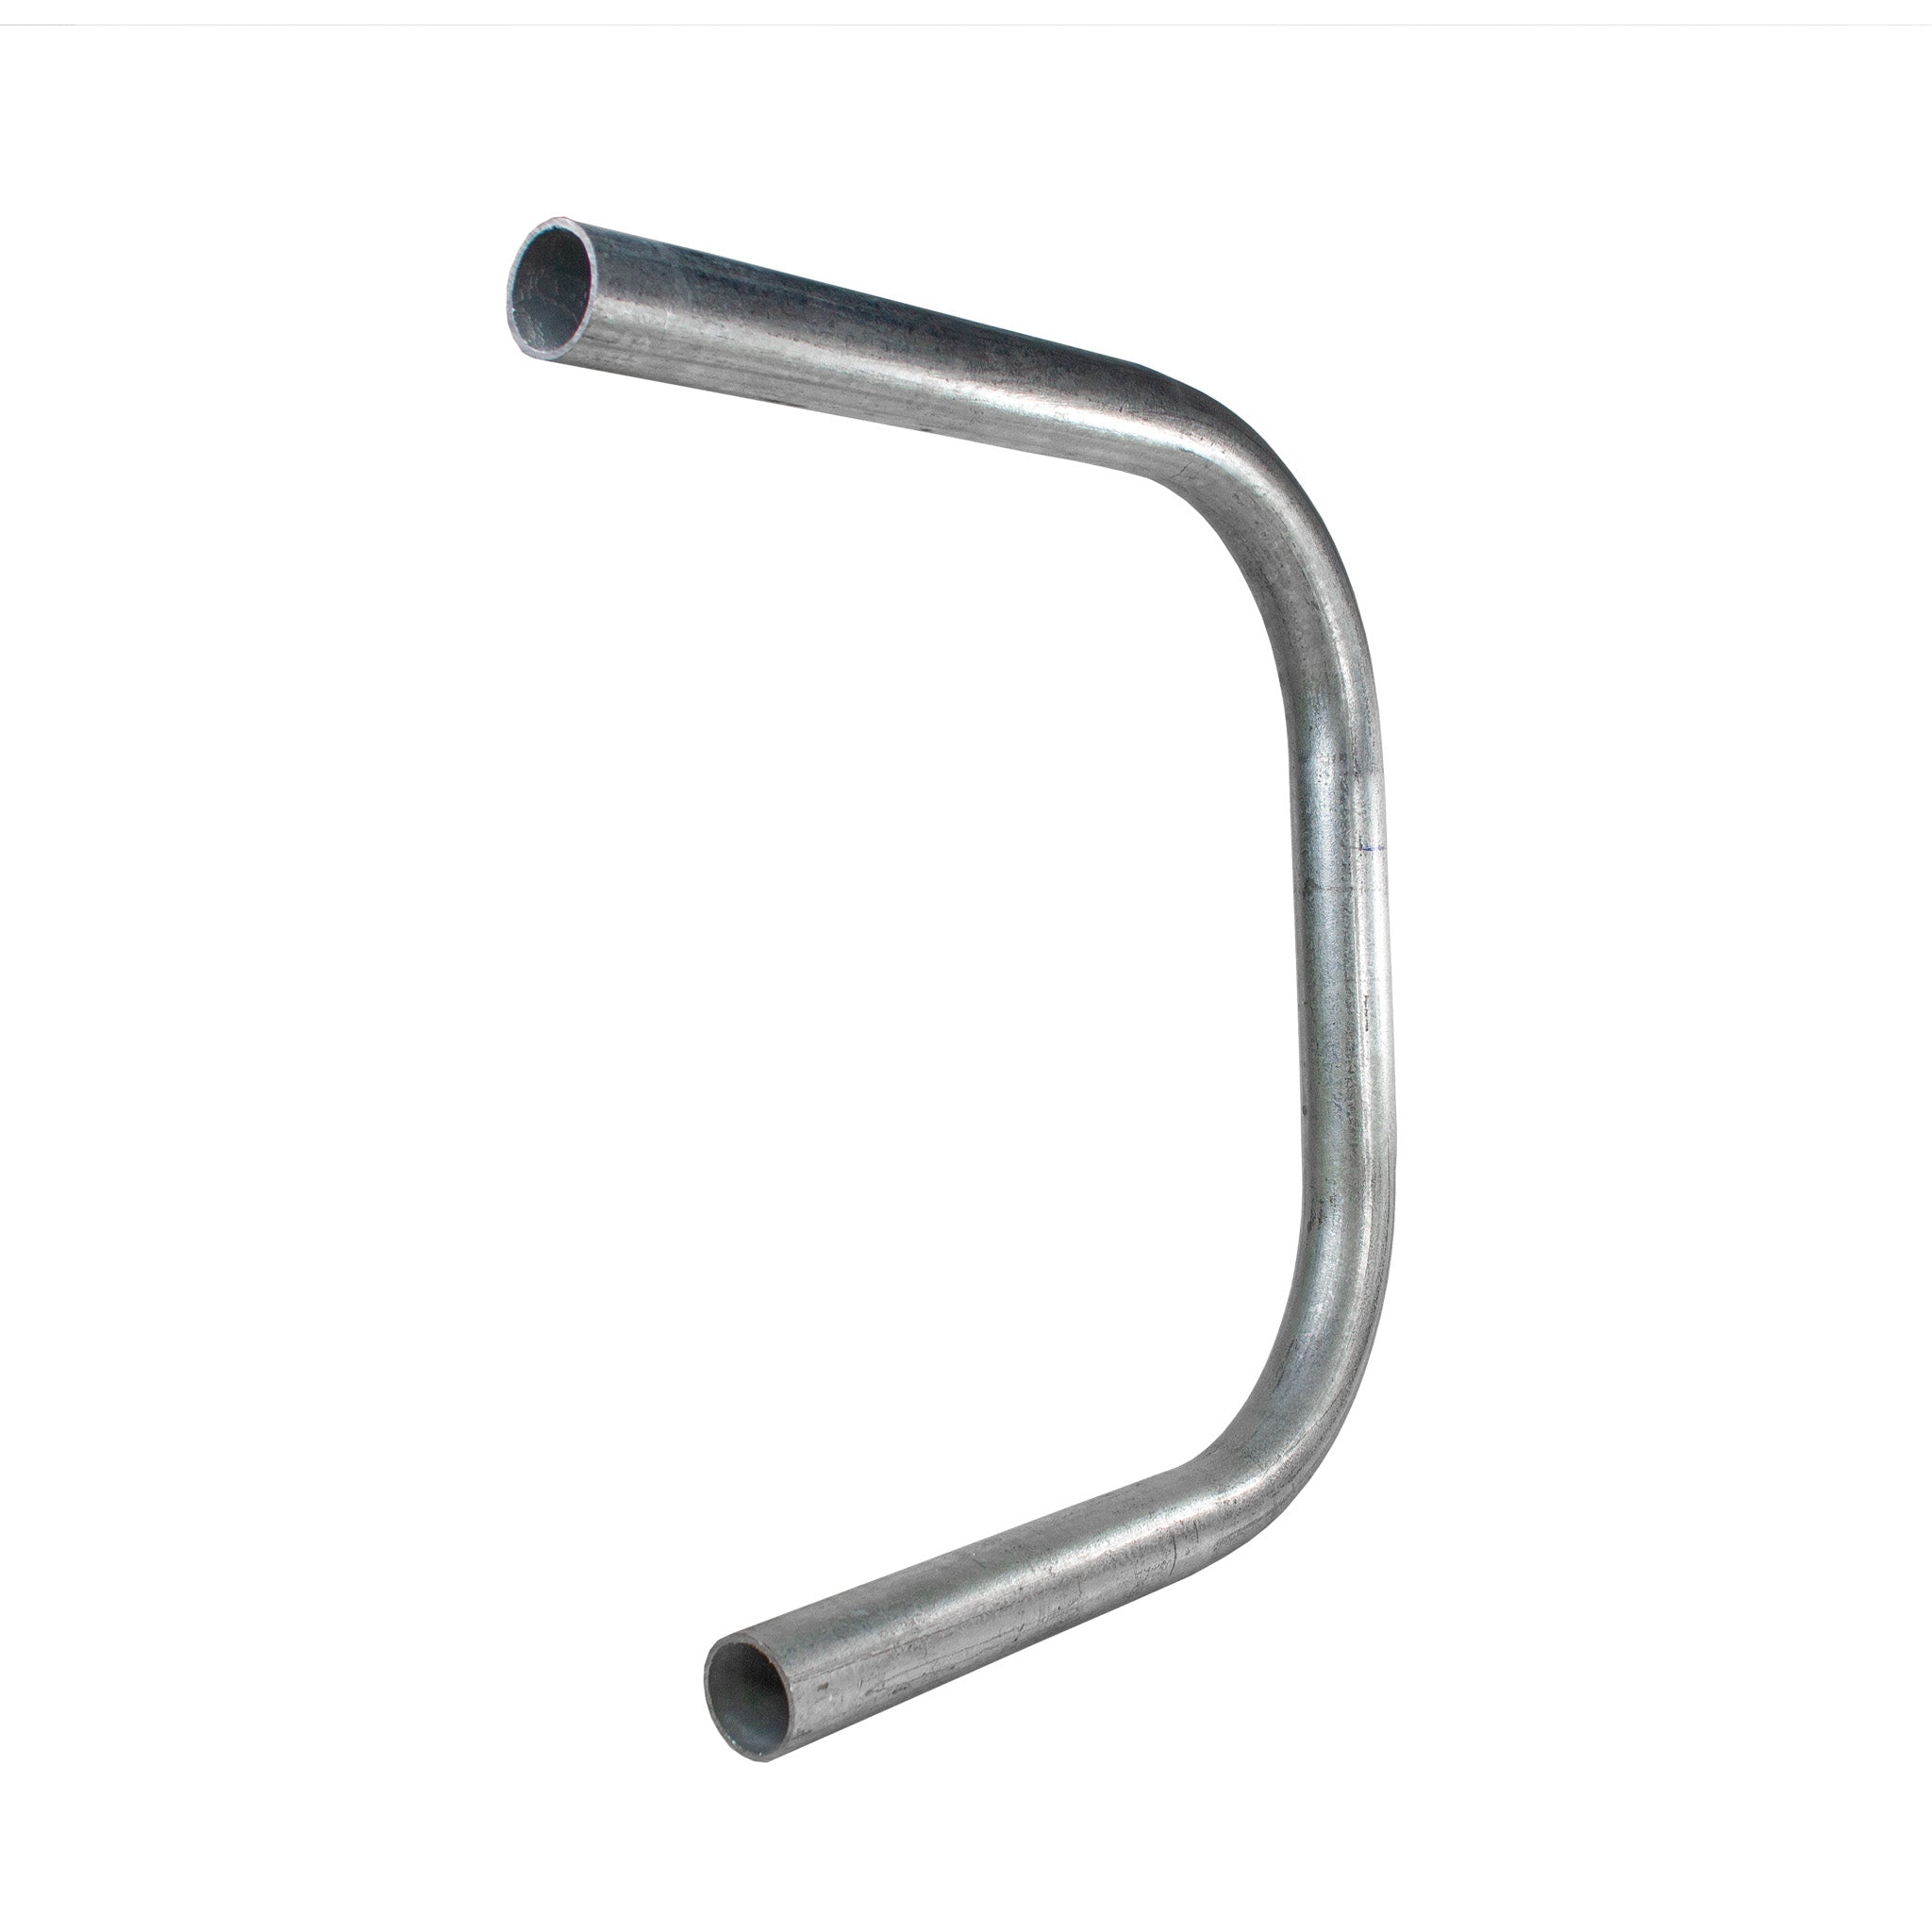 bended-bar-721-double-bend-rail-return-180degree-end-termination